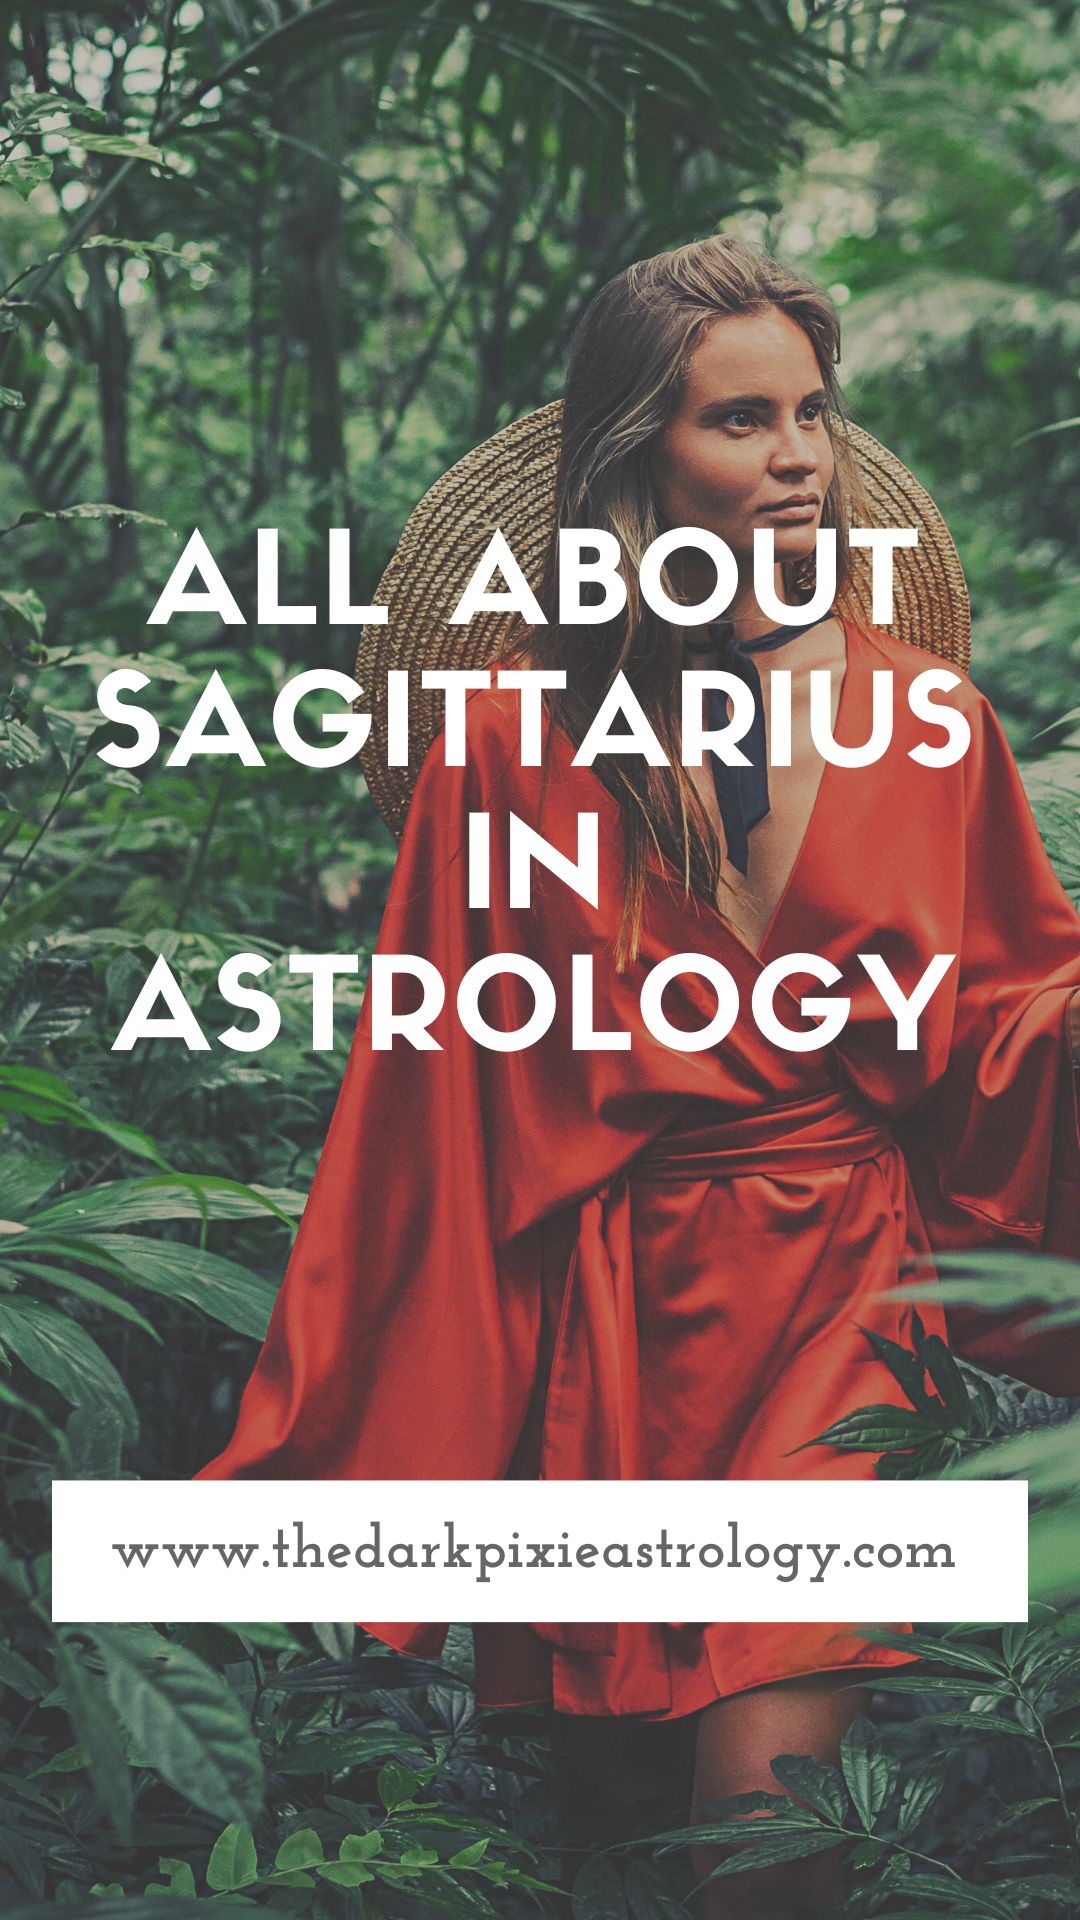 All About Sagittarius in Astrology - The Dark Pixie Astrology